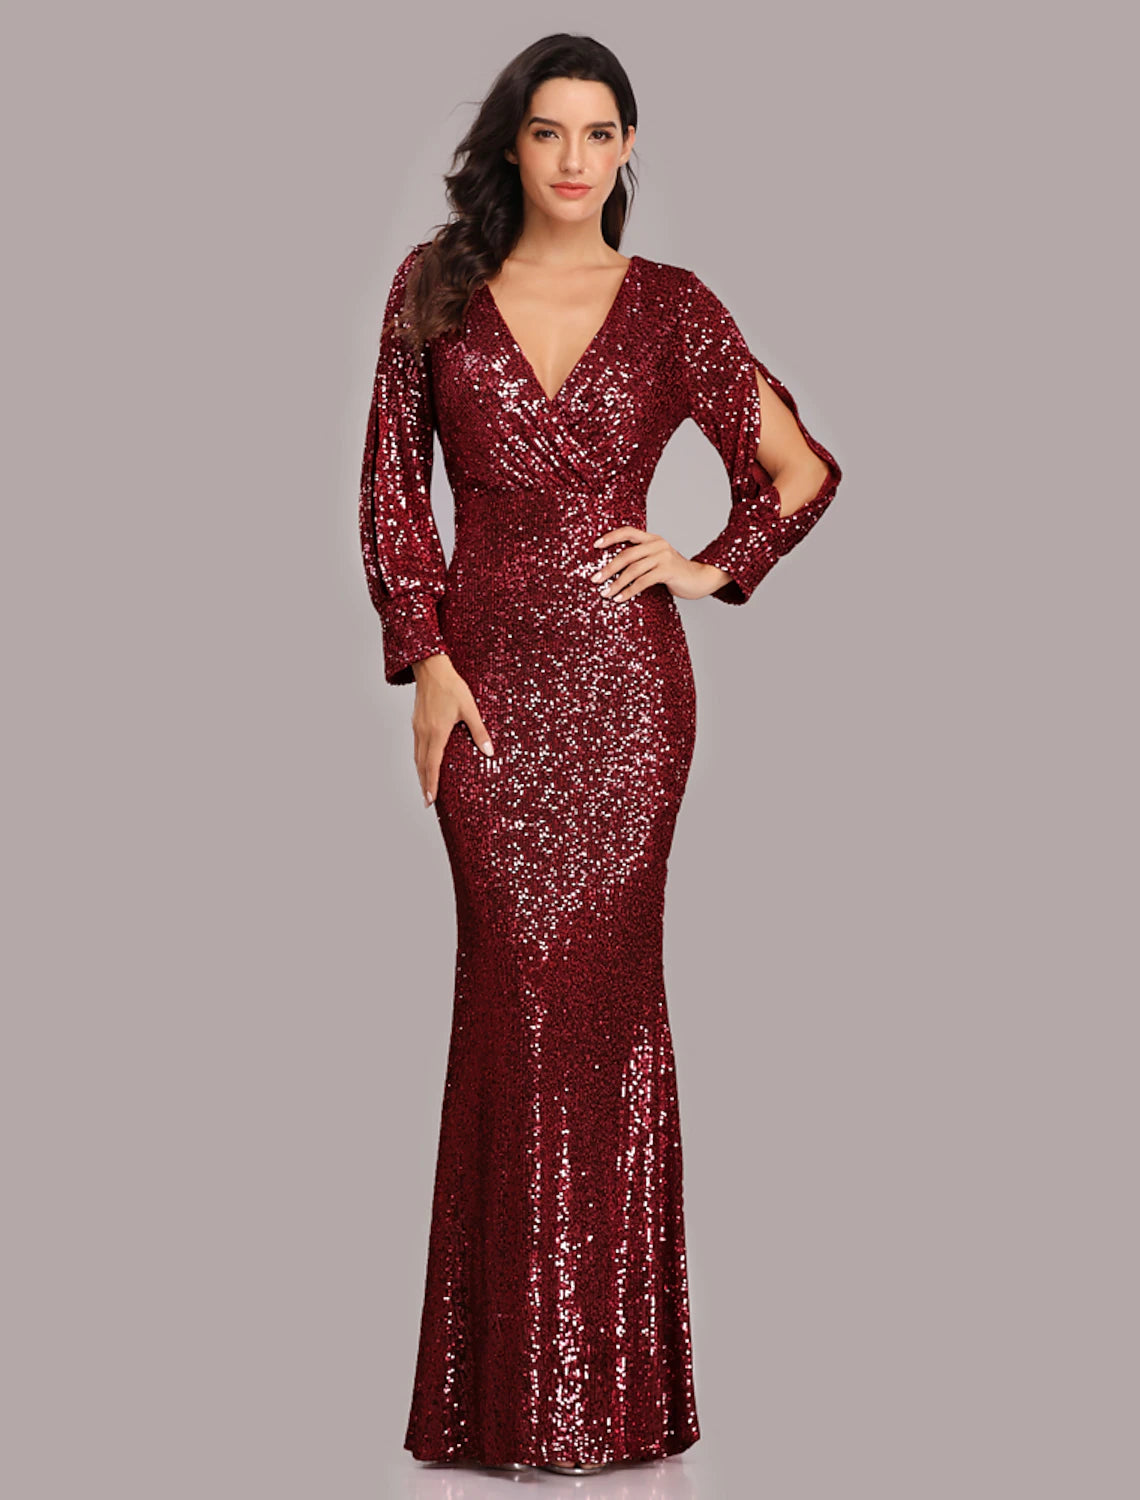 Mermaid / Trumpet Evening Gown Sparkle Dress Party Wear Floor Length Long Sleeve V Neck Sequined with Sequin